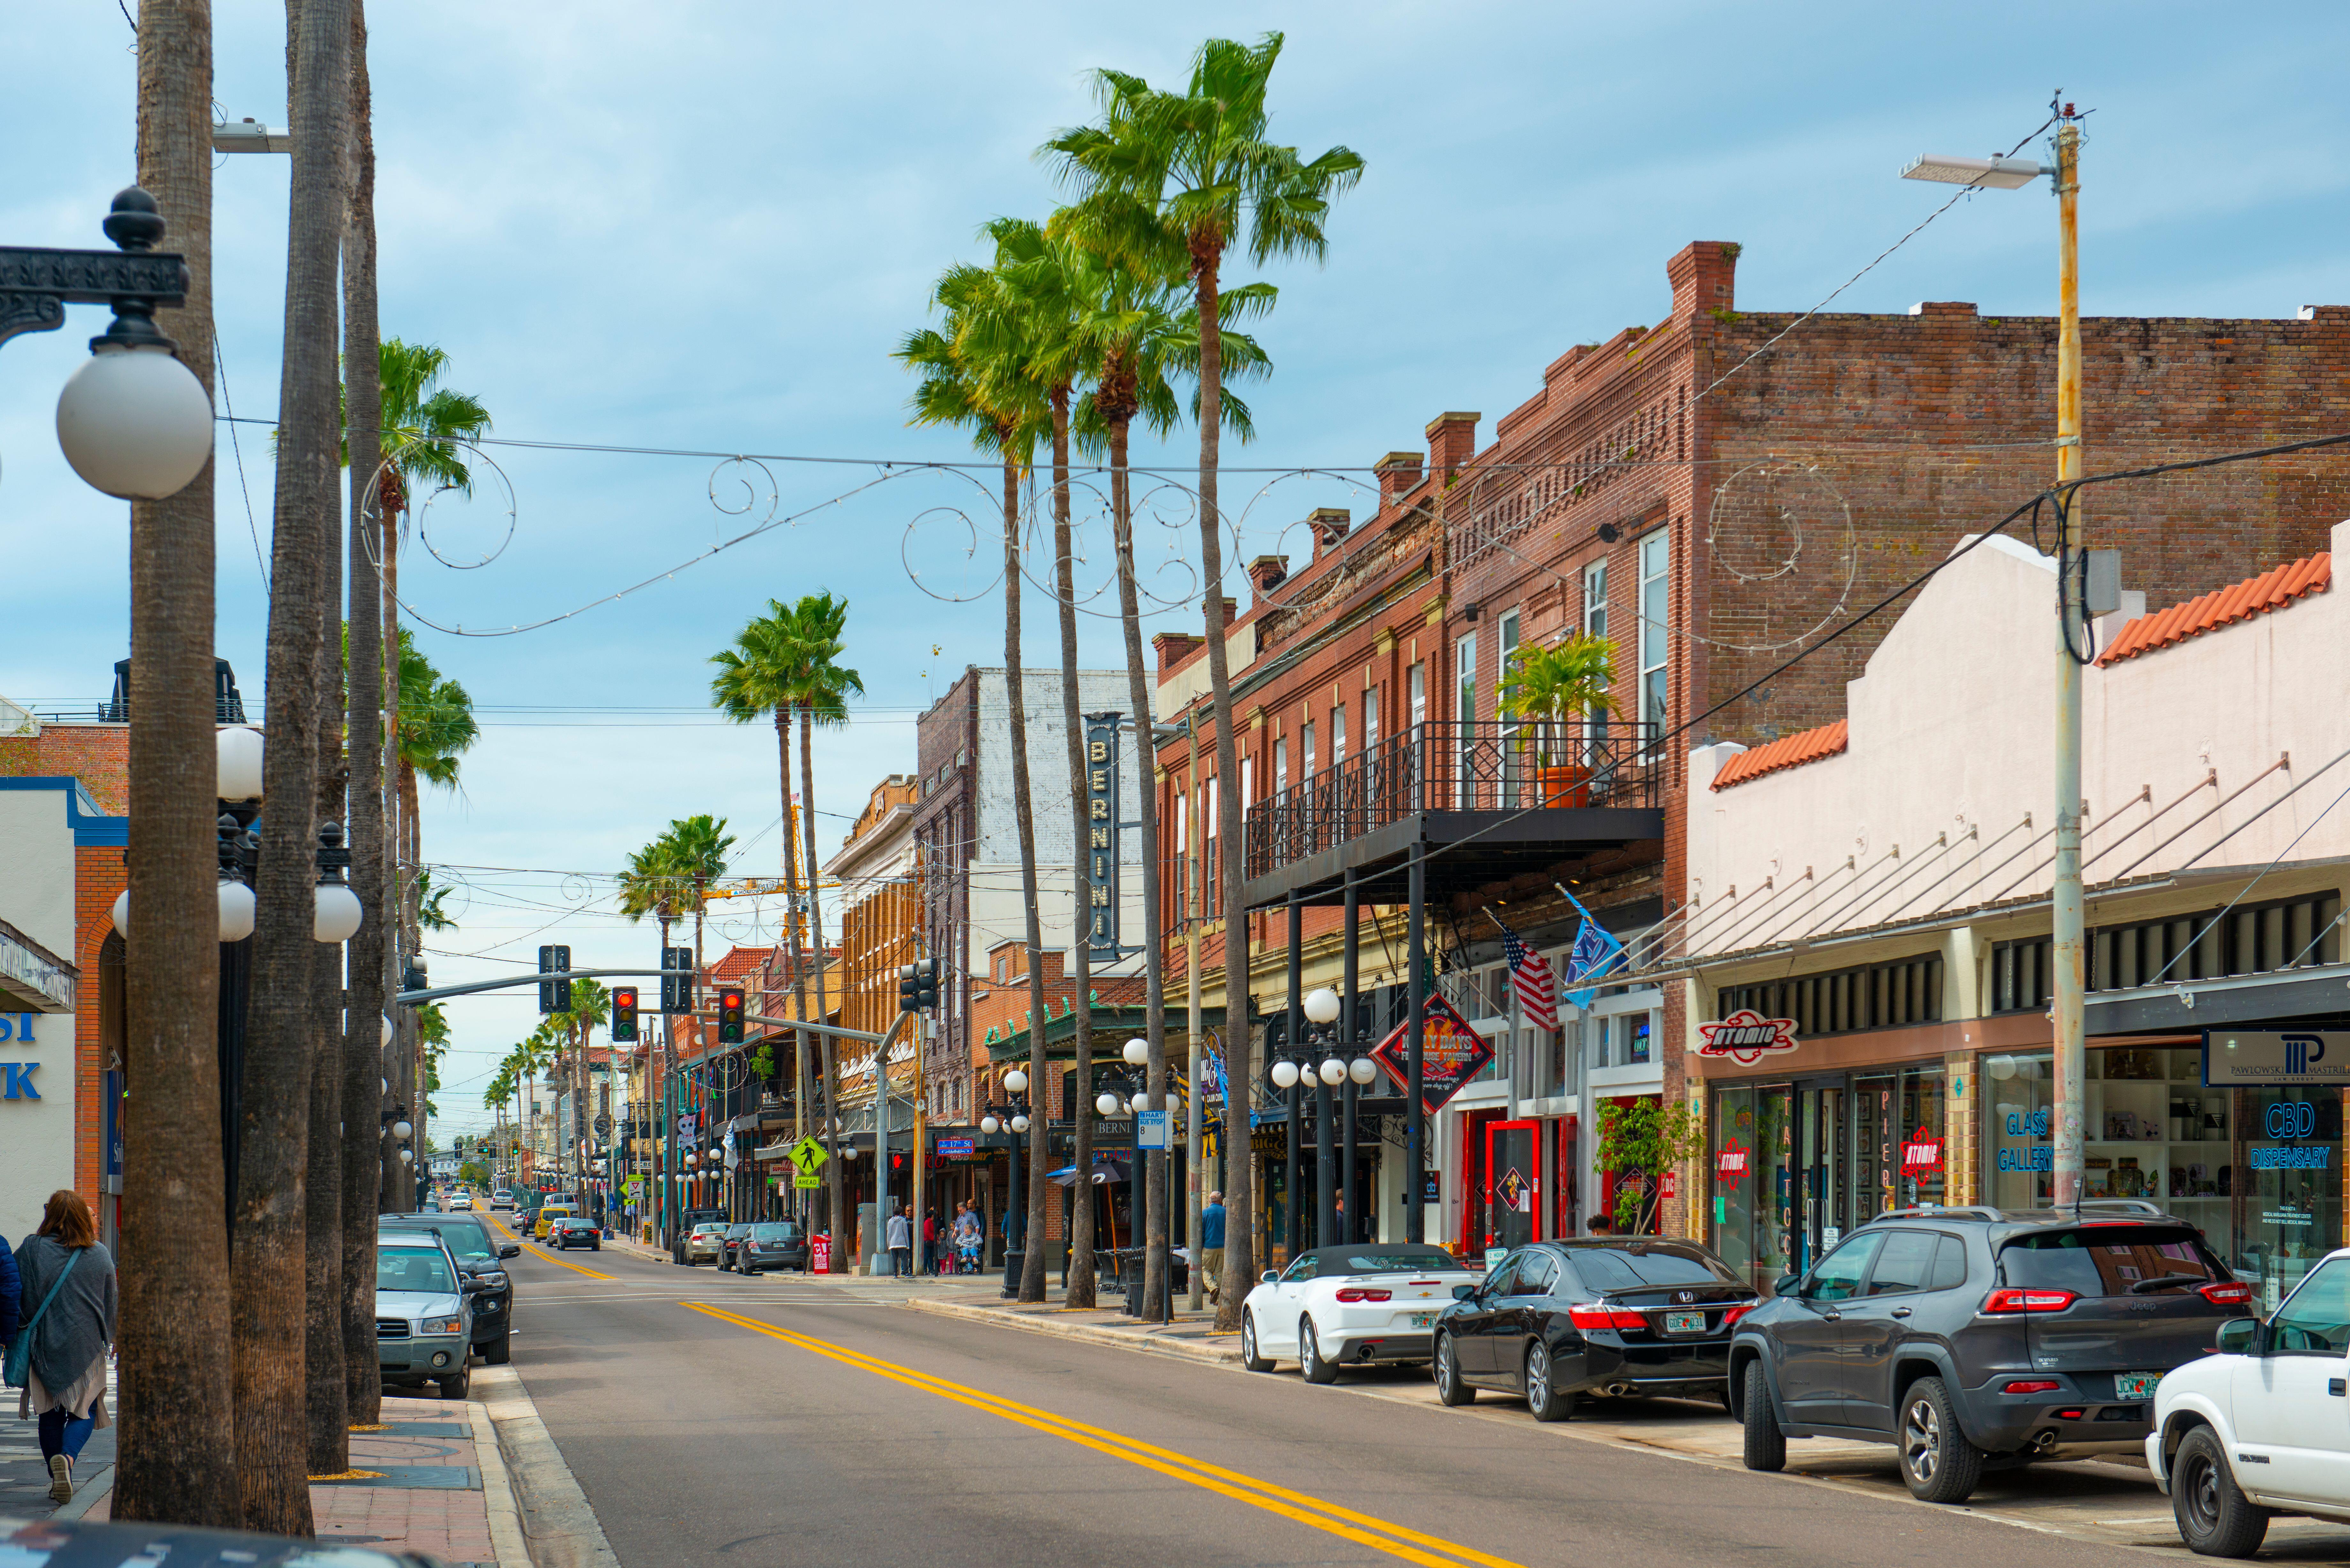 Make sure to visit Ybor City, once regarded as the cigar capital of the world